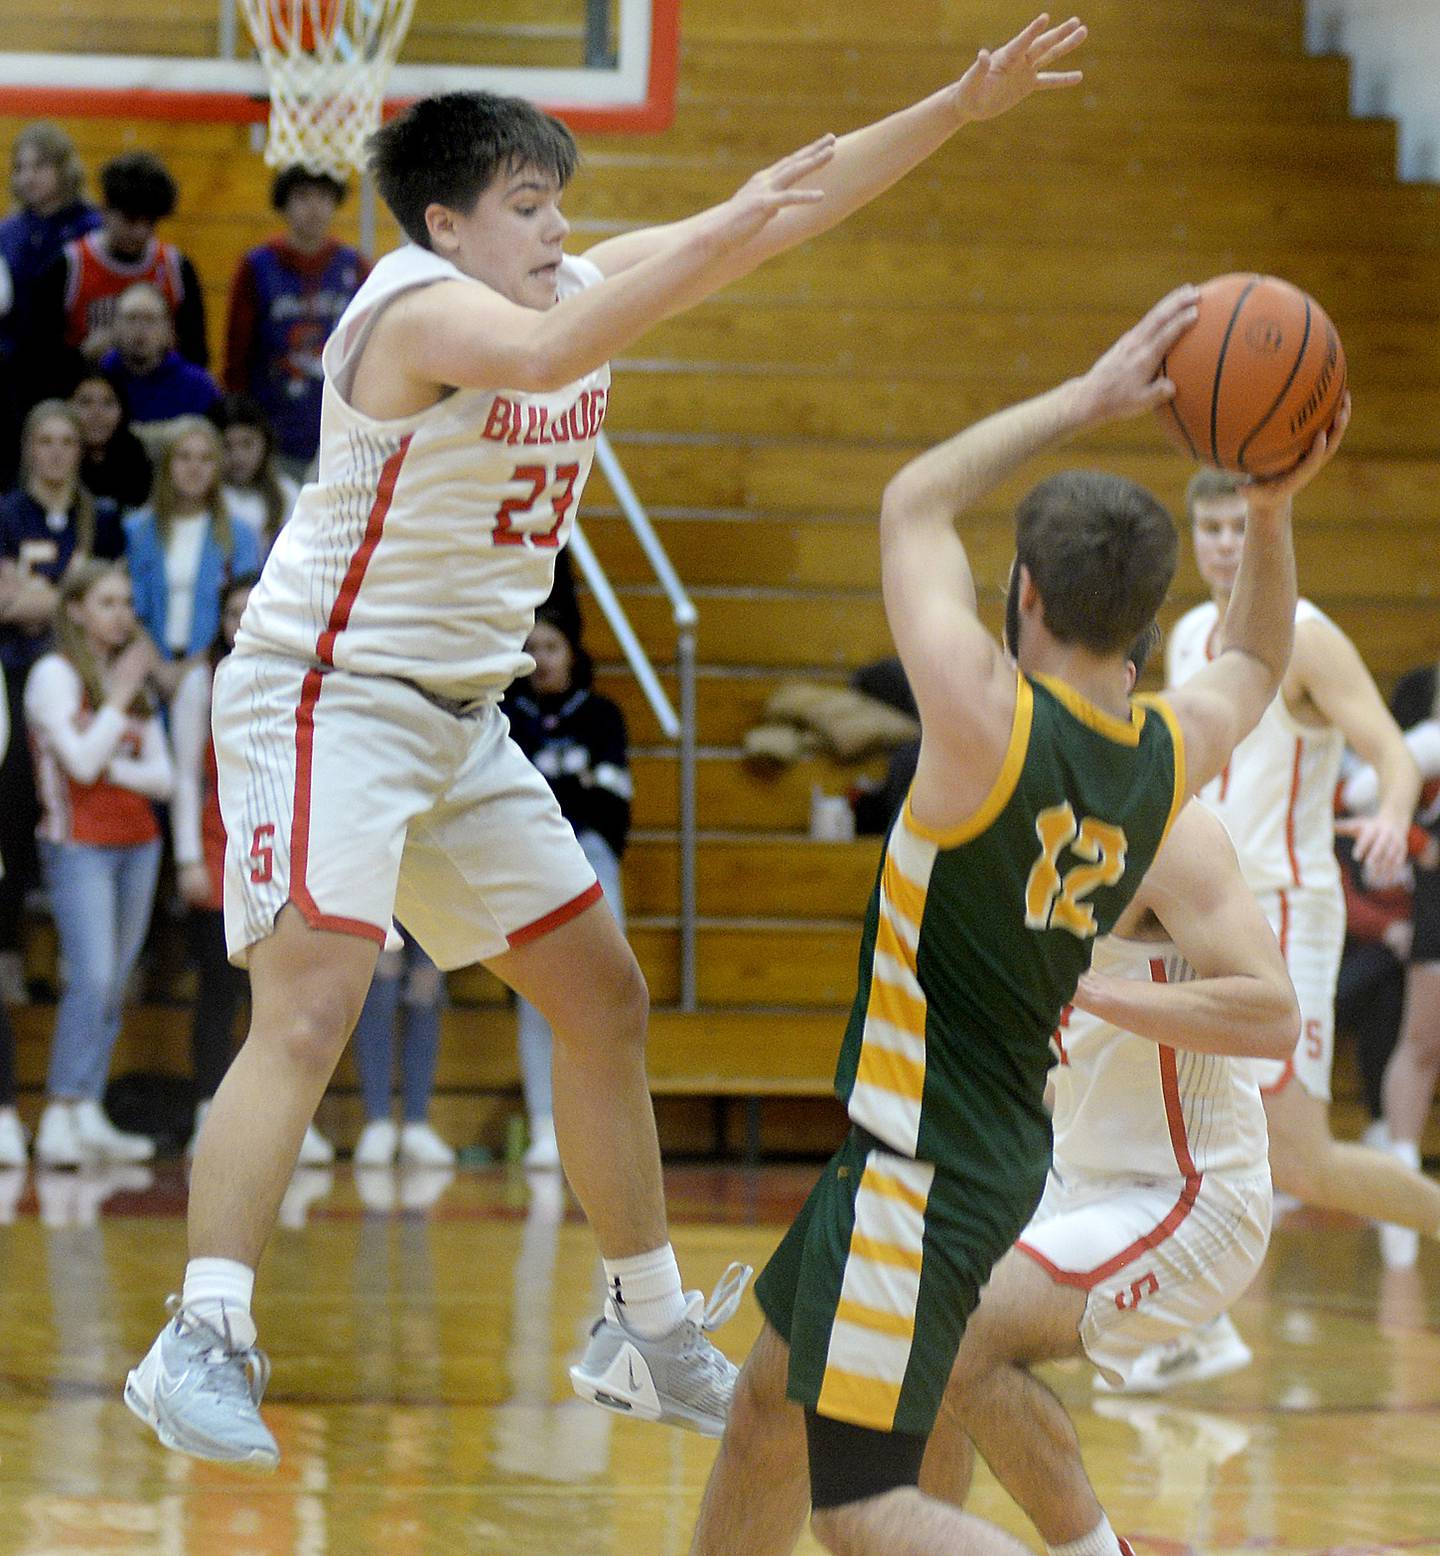 Streator’s Logan Aukland goes aerial to block a pass by Coal City’s Carson Shepard in the 2nd period on Tuesday, Jan. 31, 2023 at Streator High School.